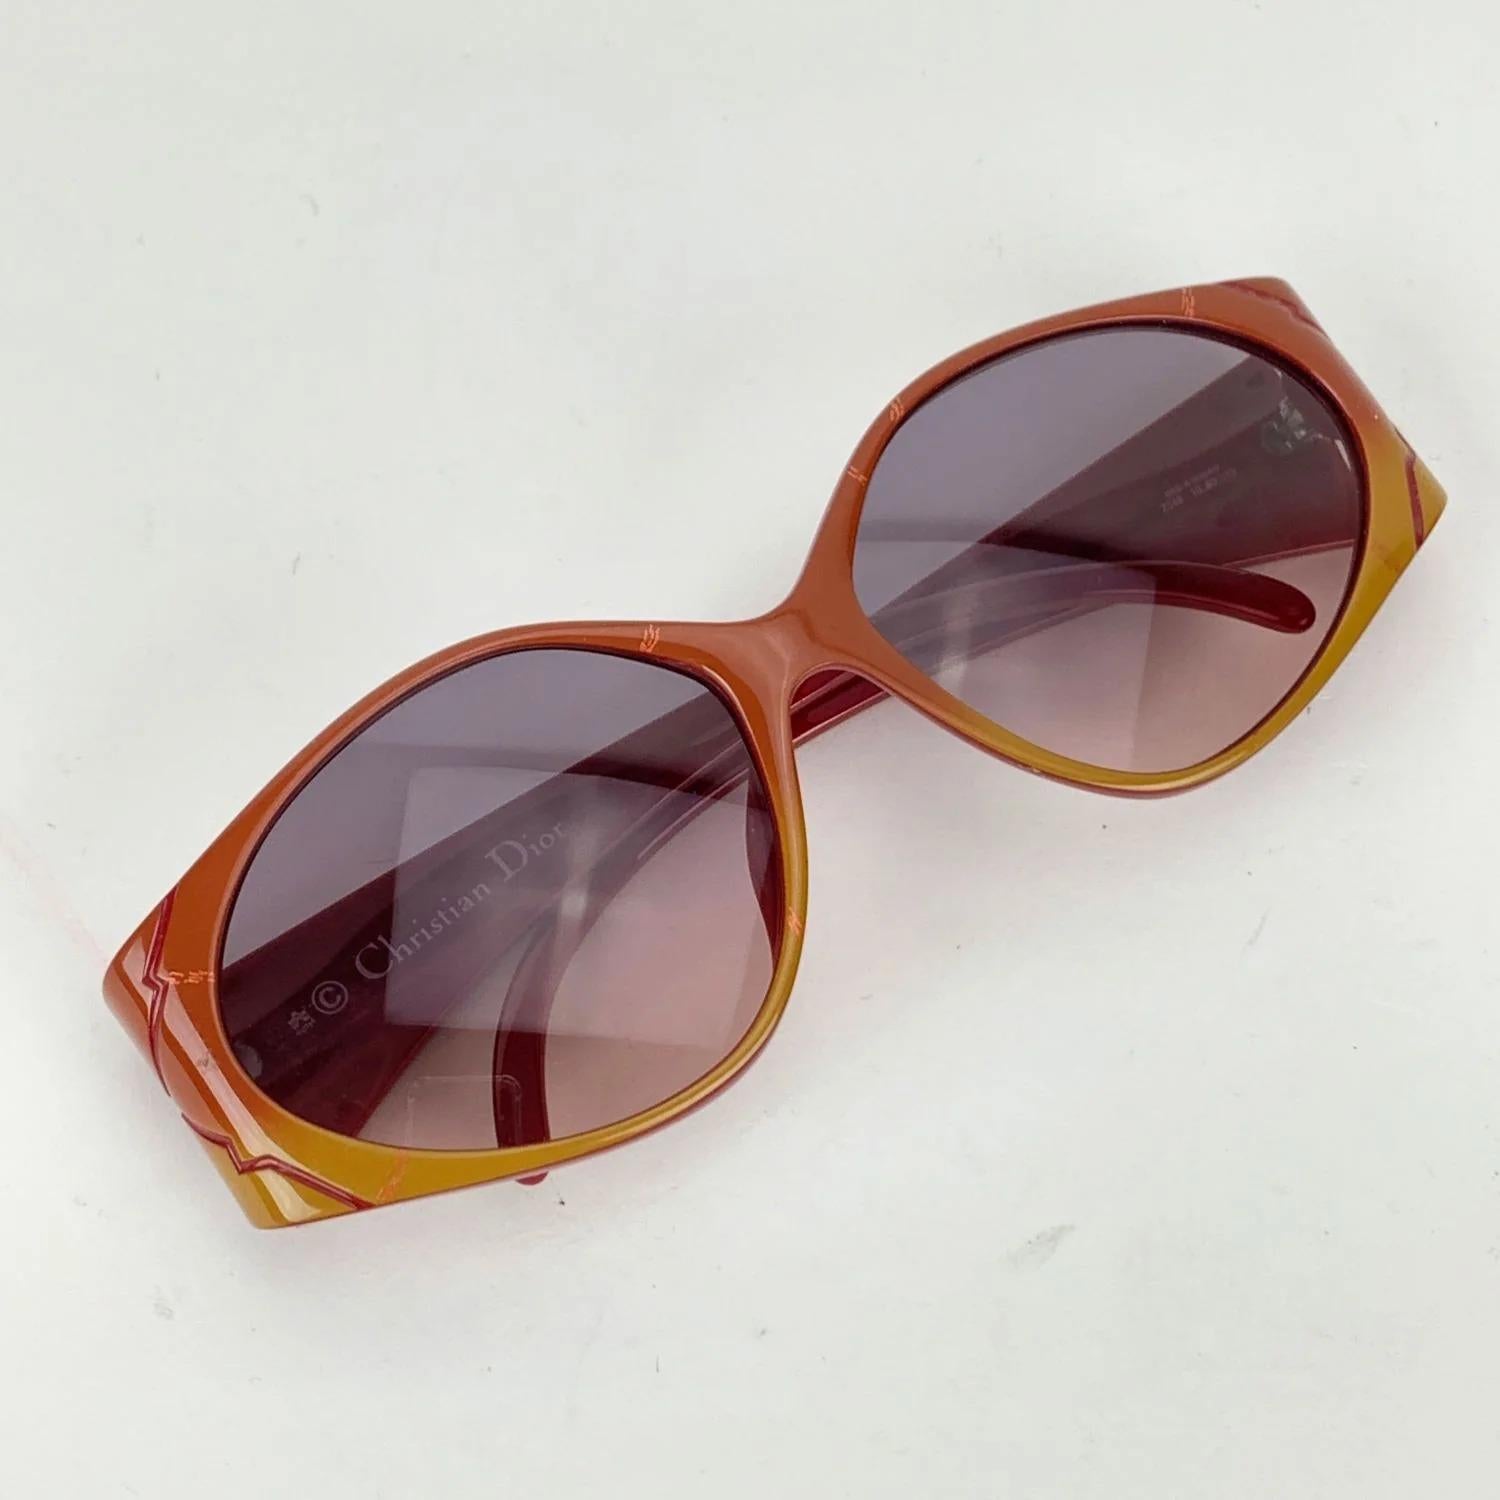 Christian Dior Vintage Sunglasses 2348 10 Brown Red 60-15 130 mm 1